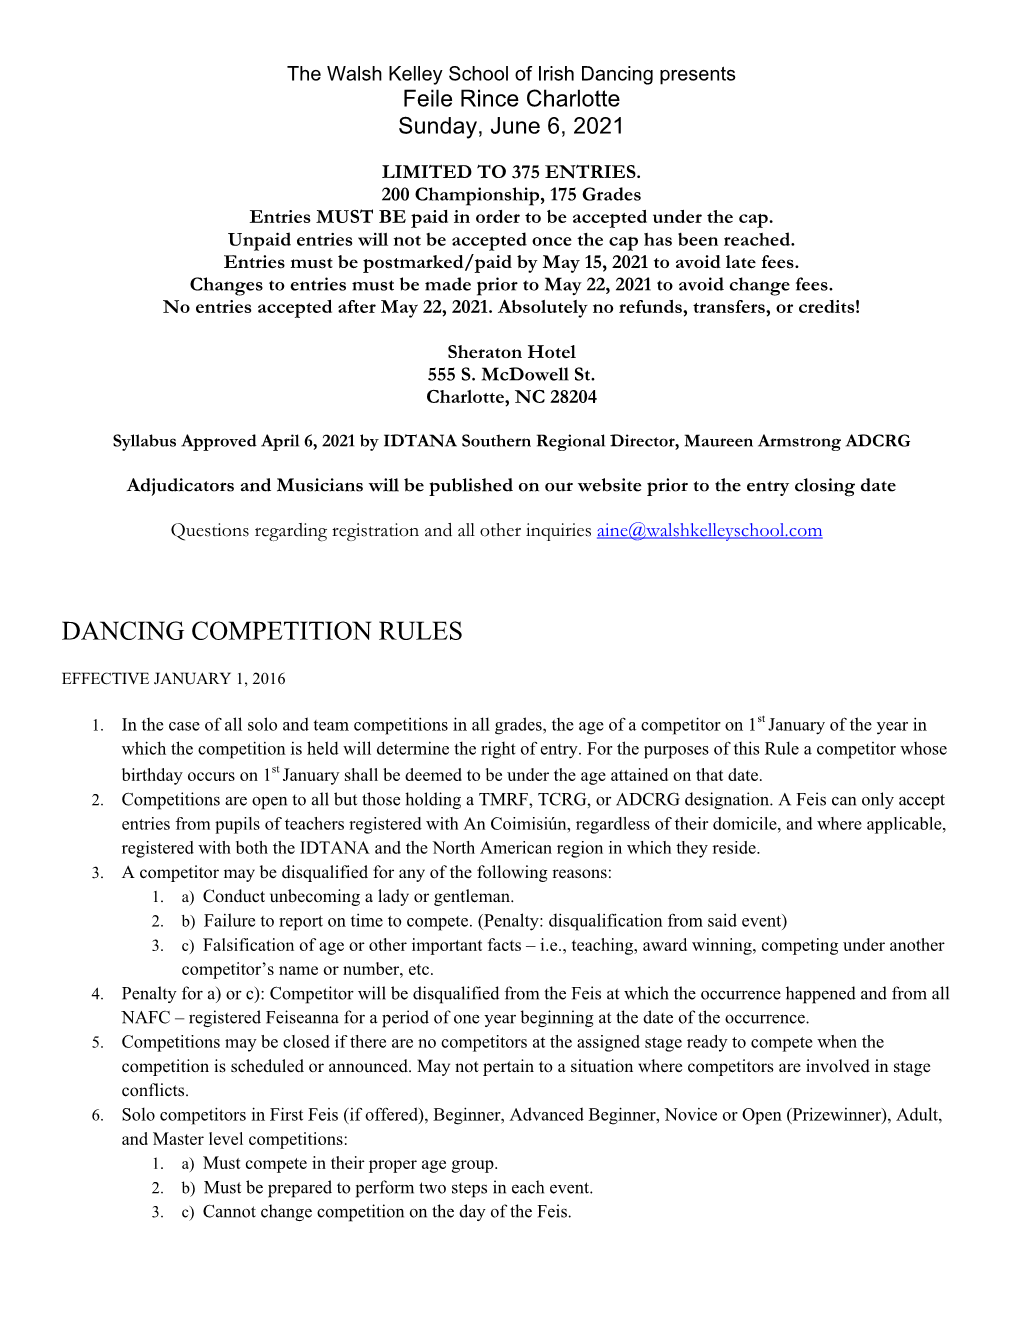 Dancing Competition Rules